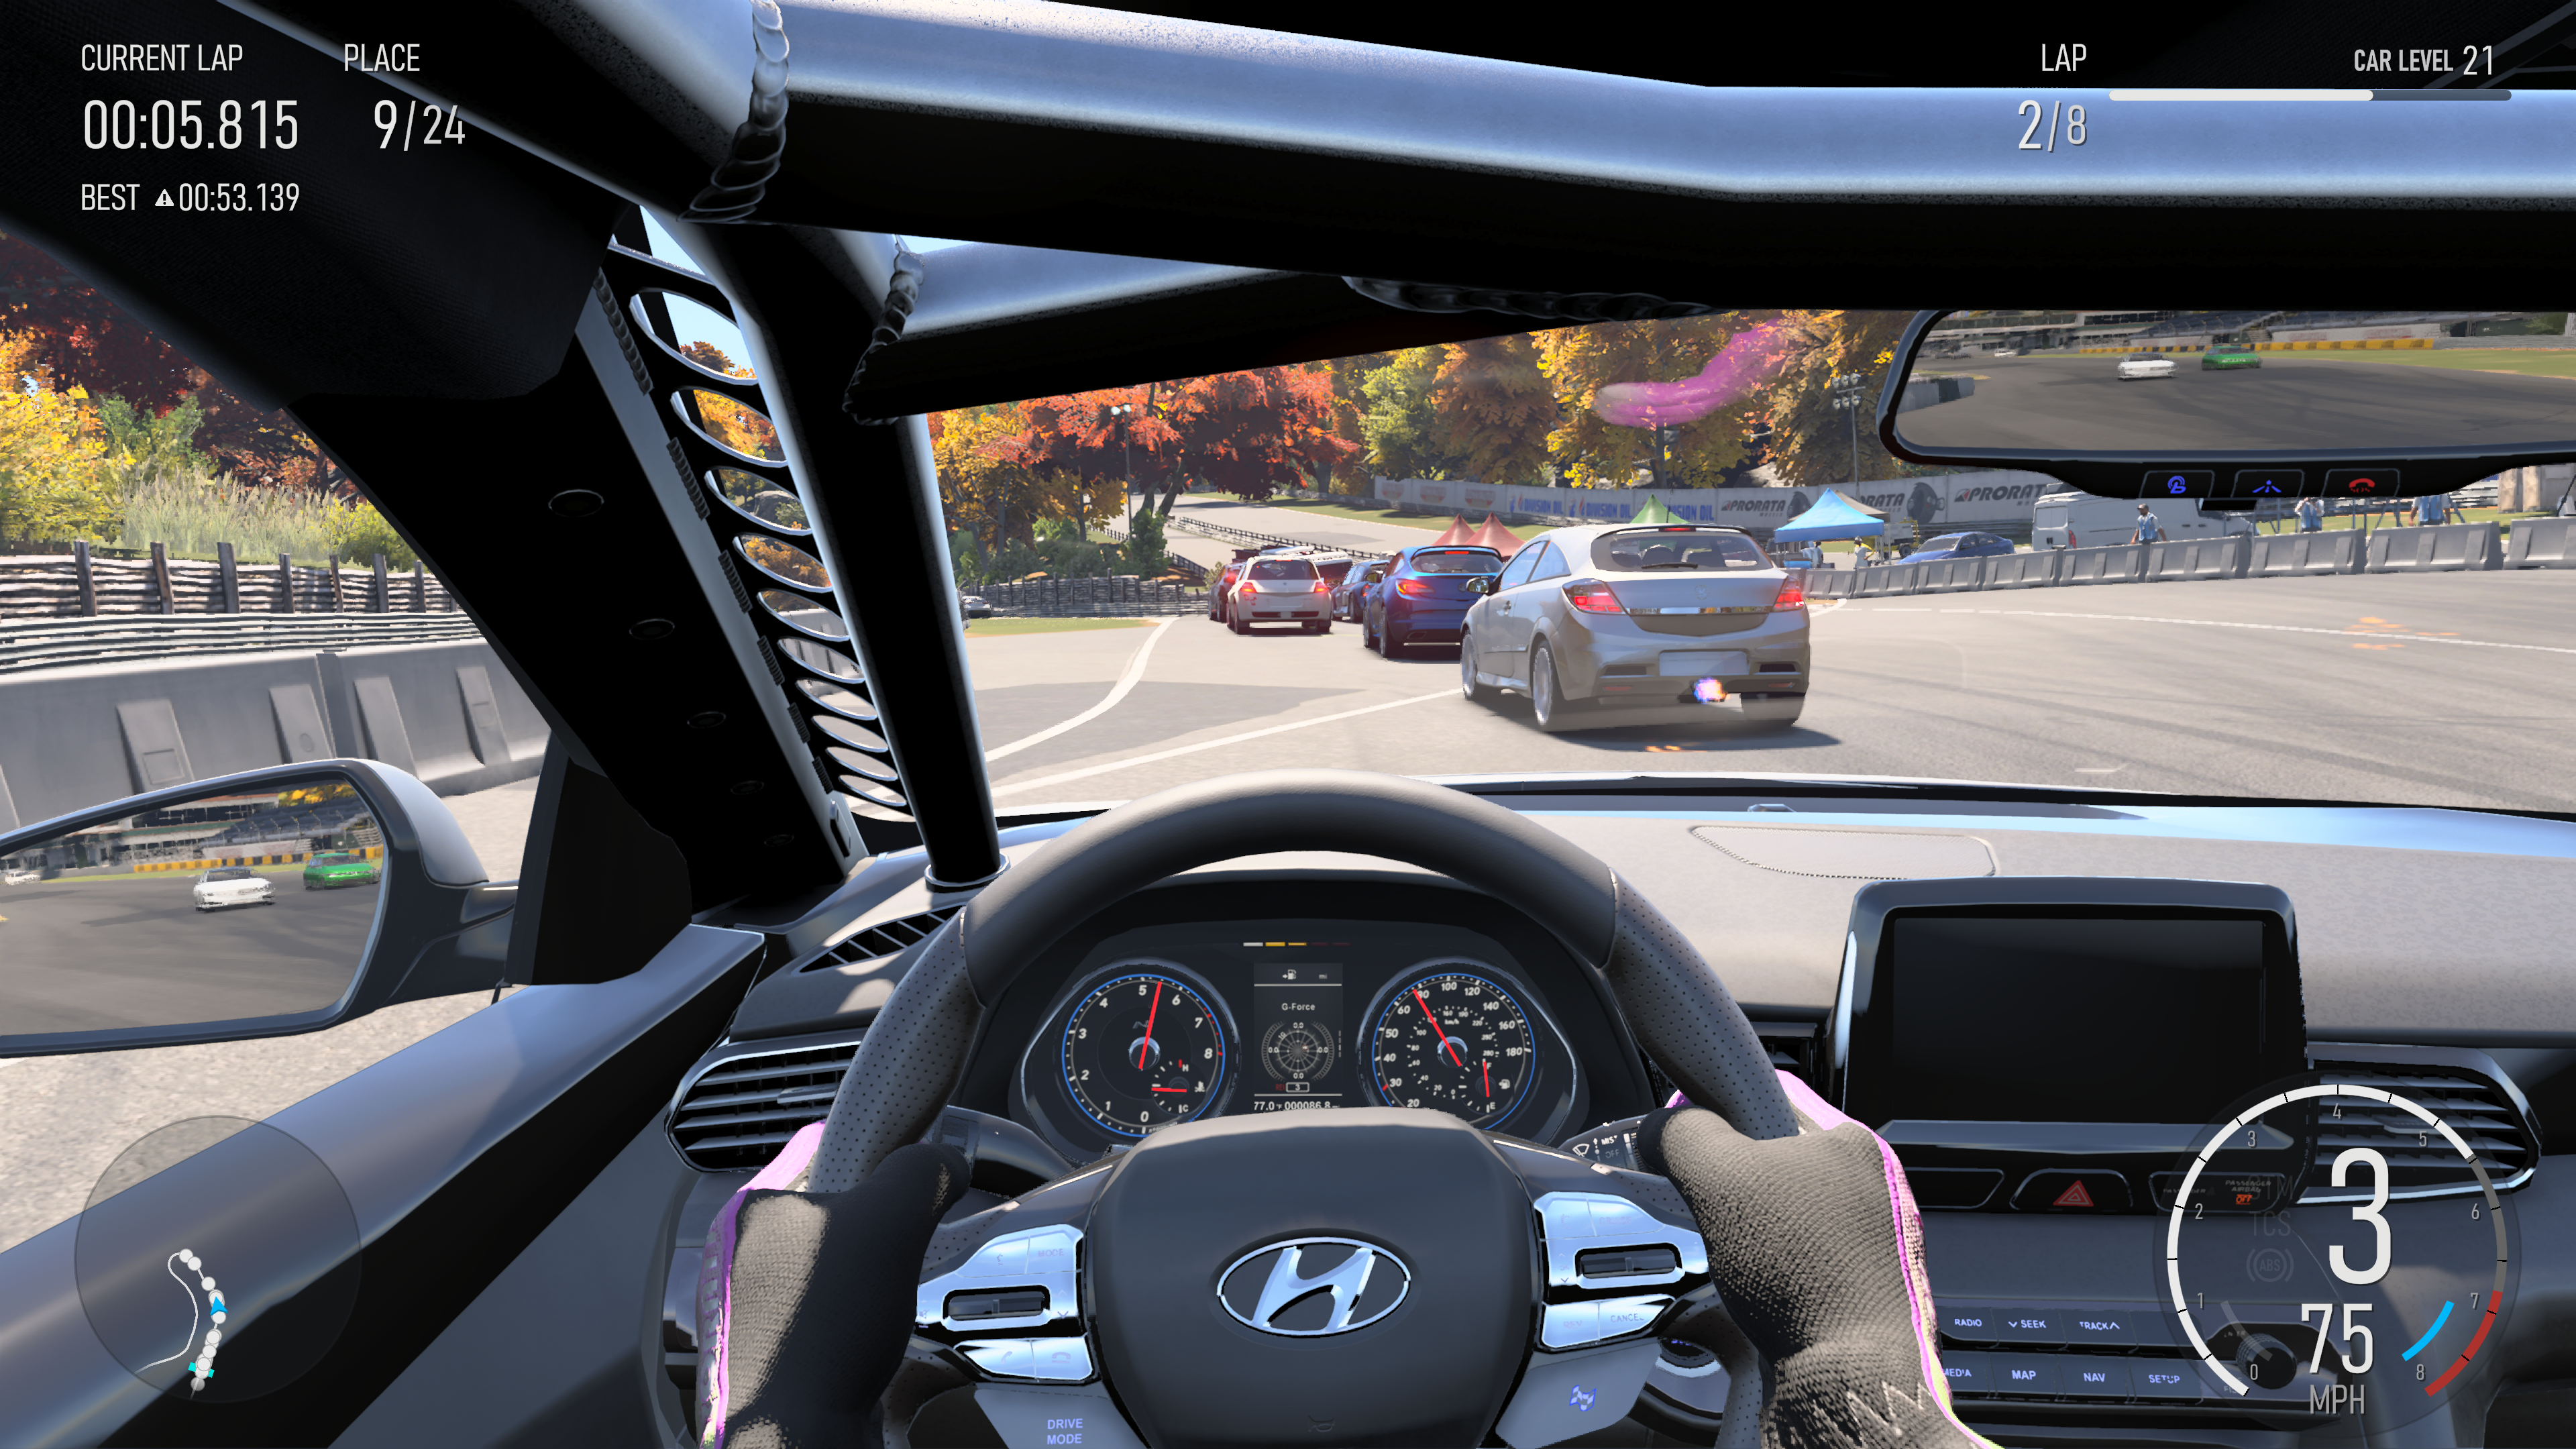 Review: Forza Motorsport (2023) refines simulation racing